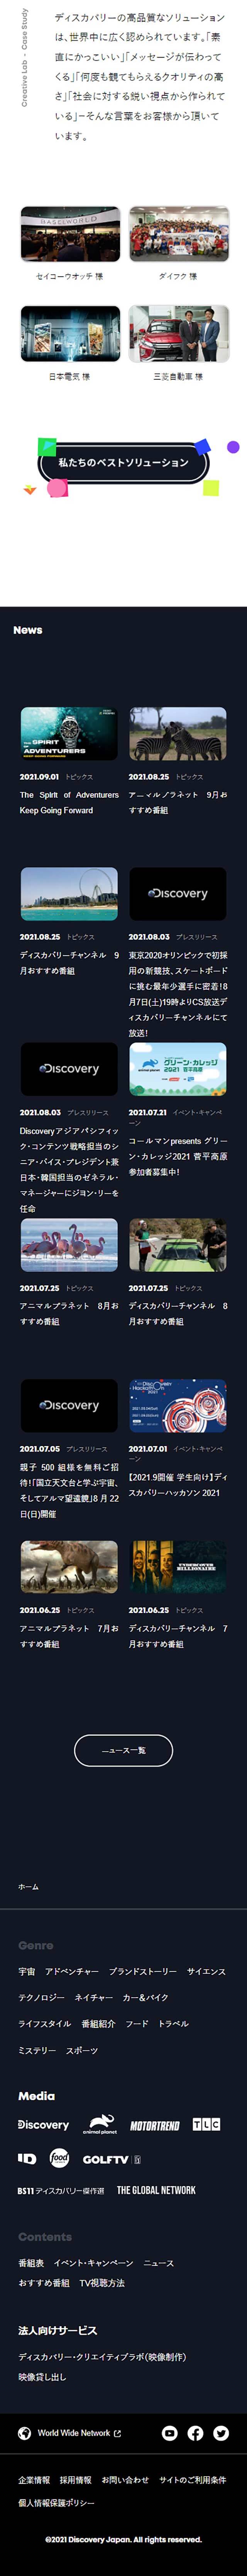 Discovery Japan_sp_2